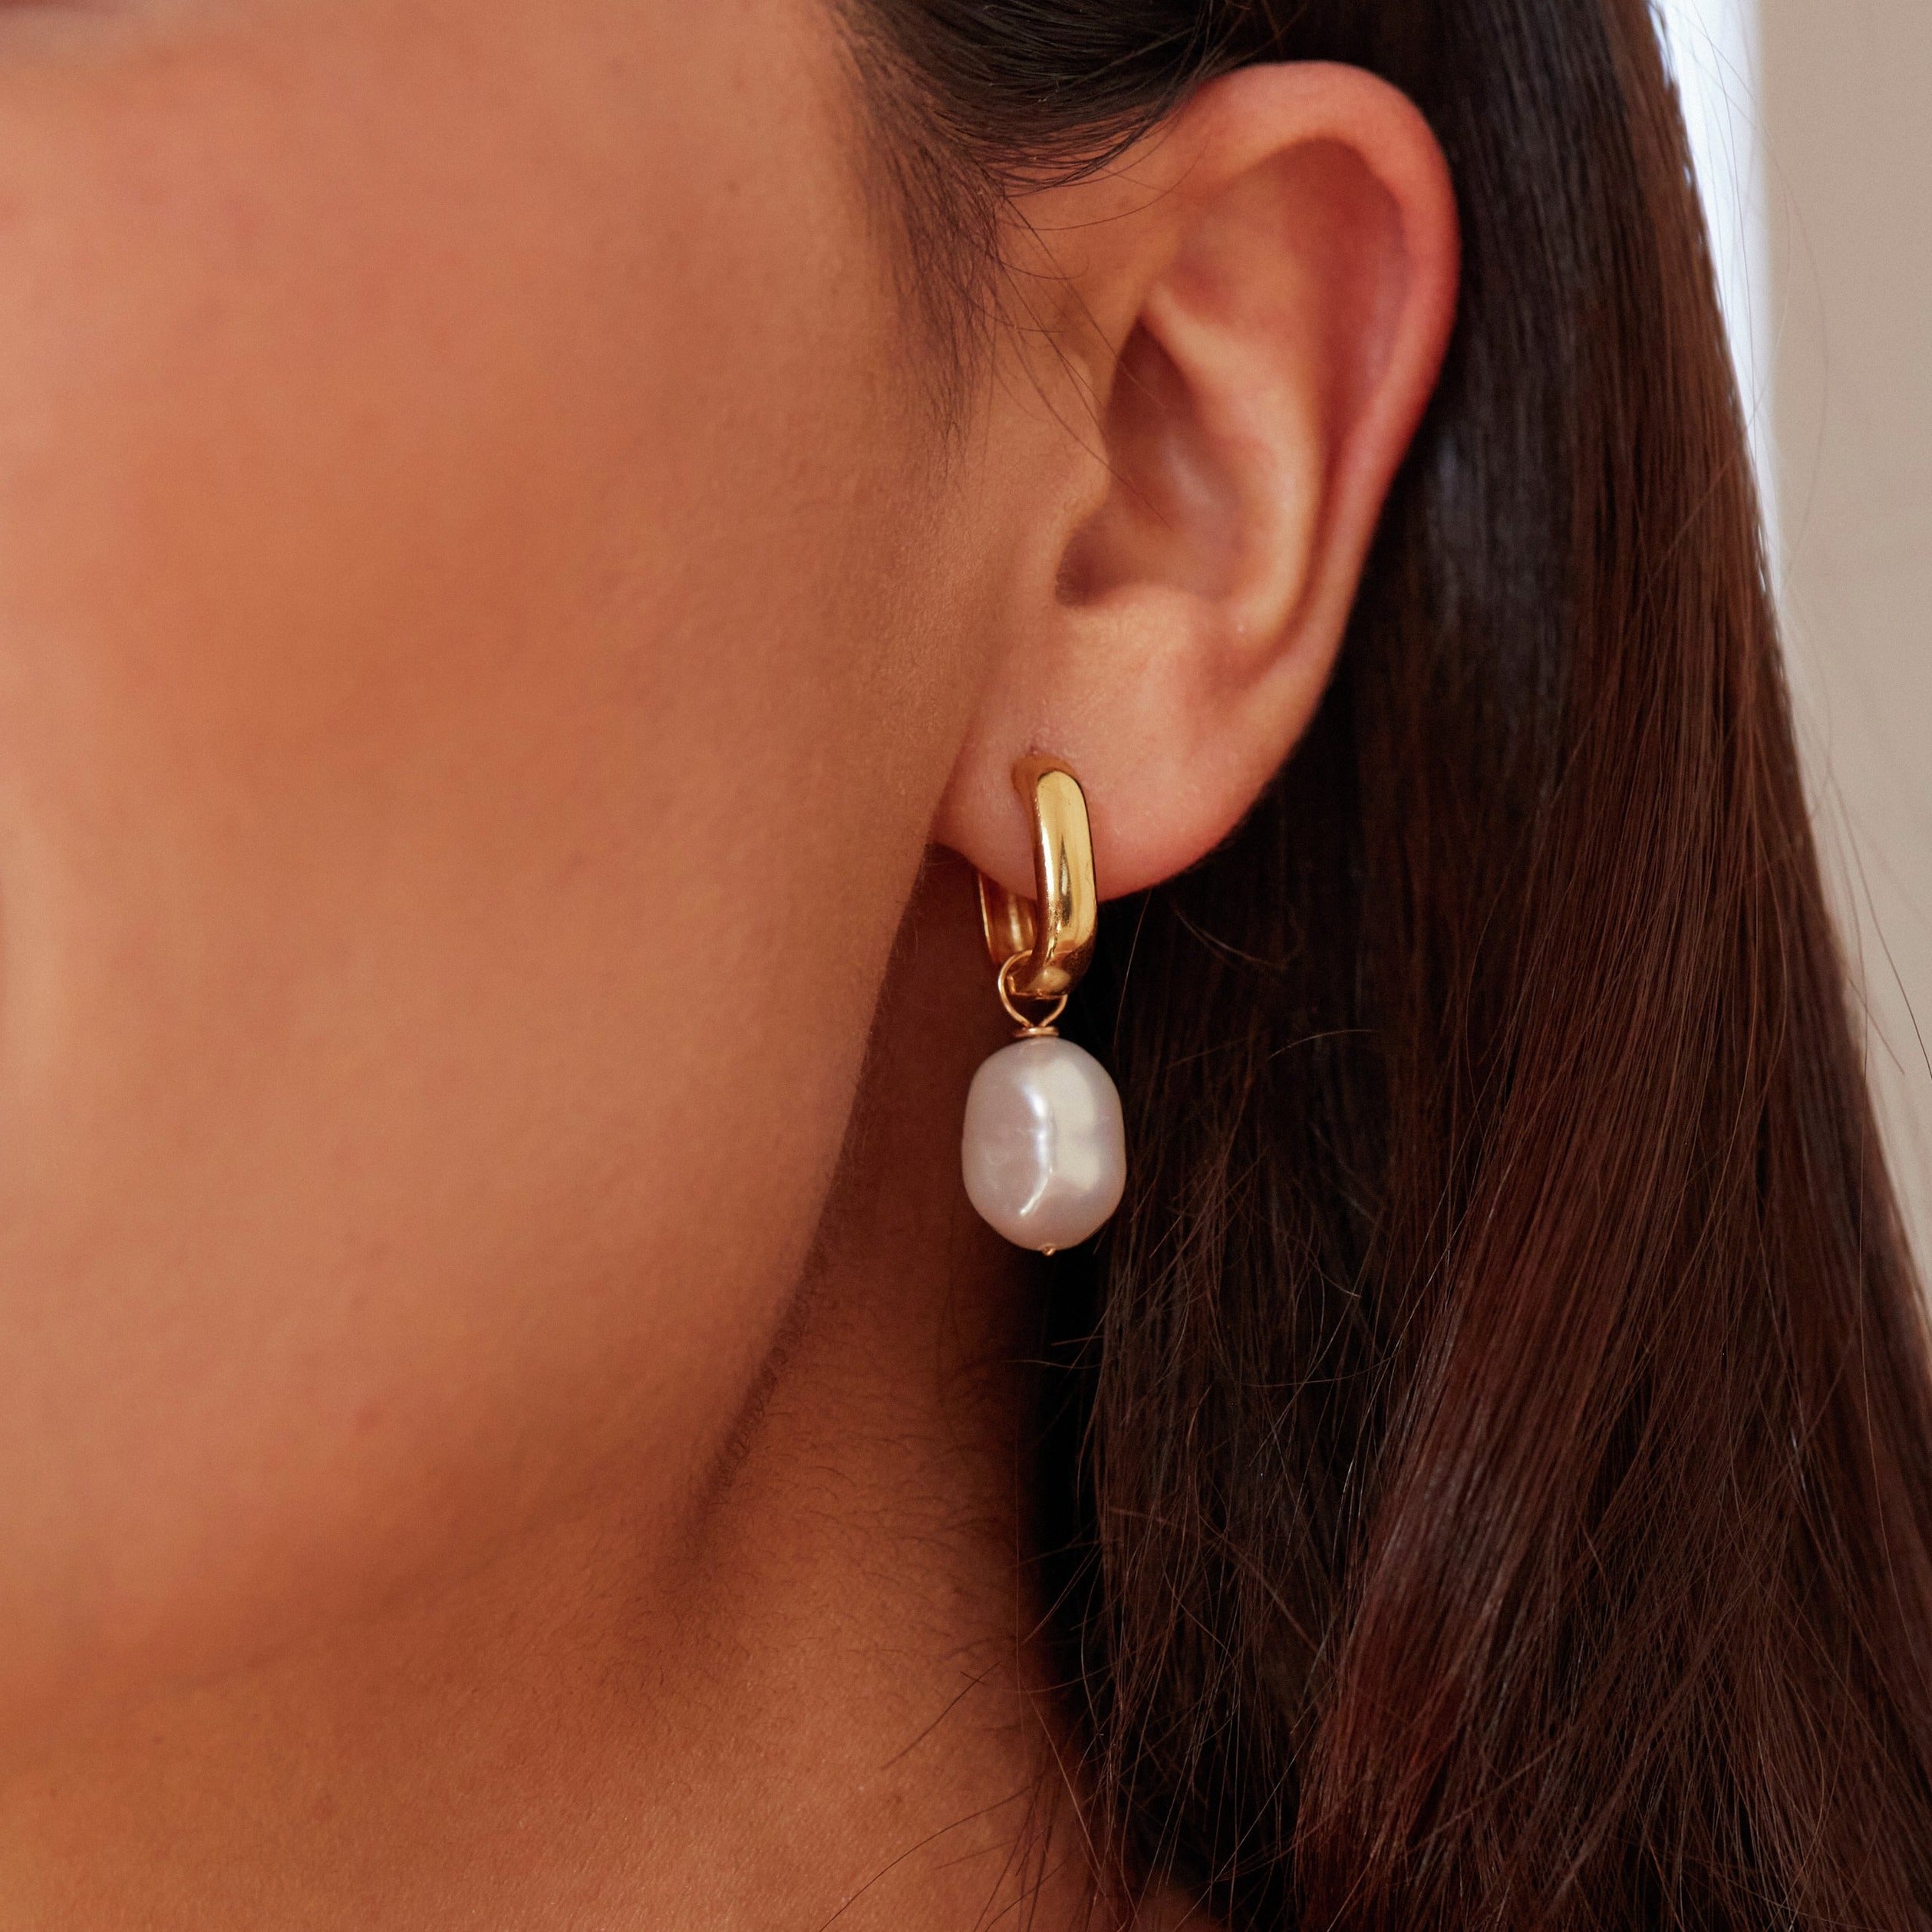 A gold thick squared hoop pearl drop earring close up in an ear lobe